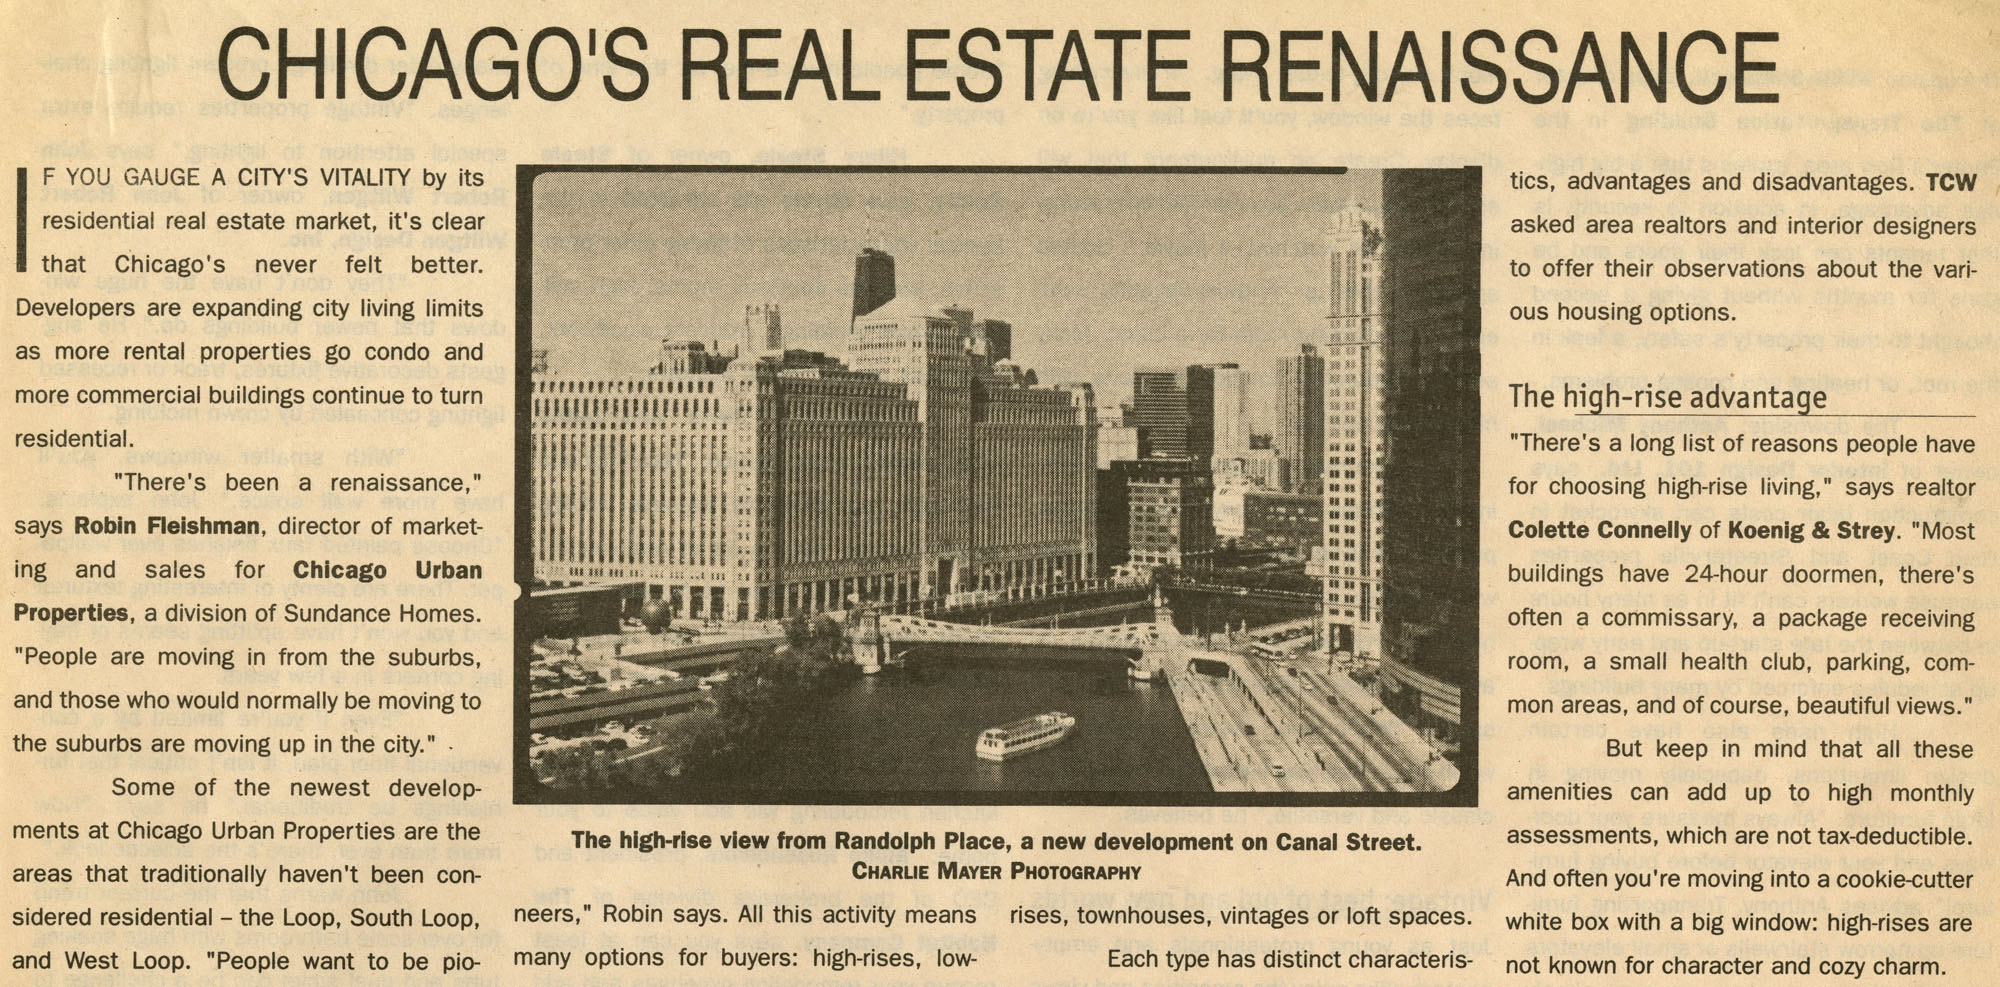 Today's Chicago Woman 08-09 Chicago's Real Estate Renaissance